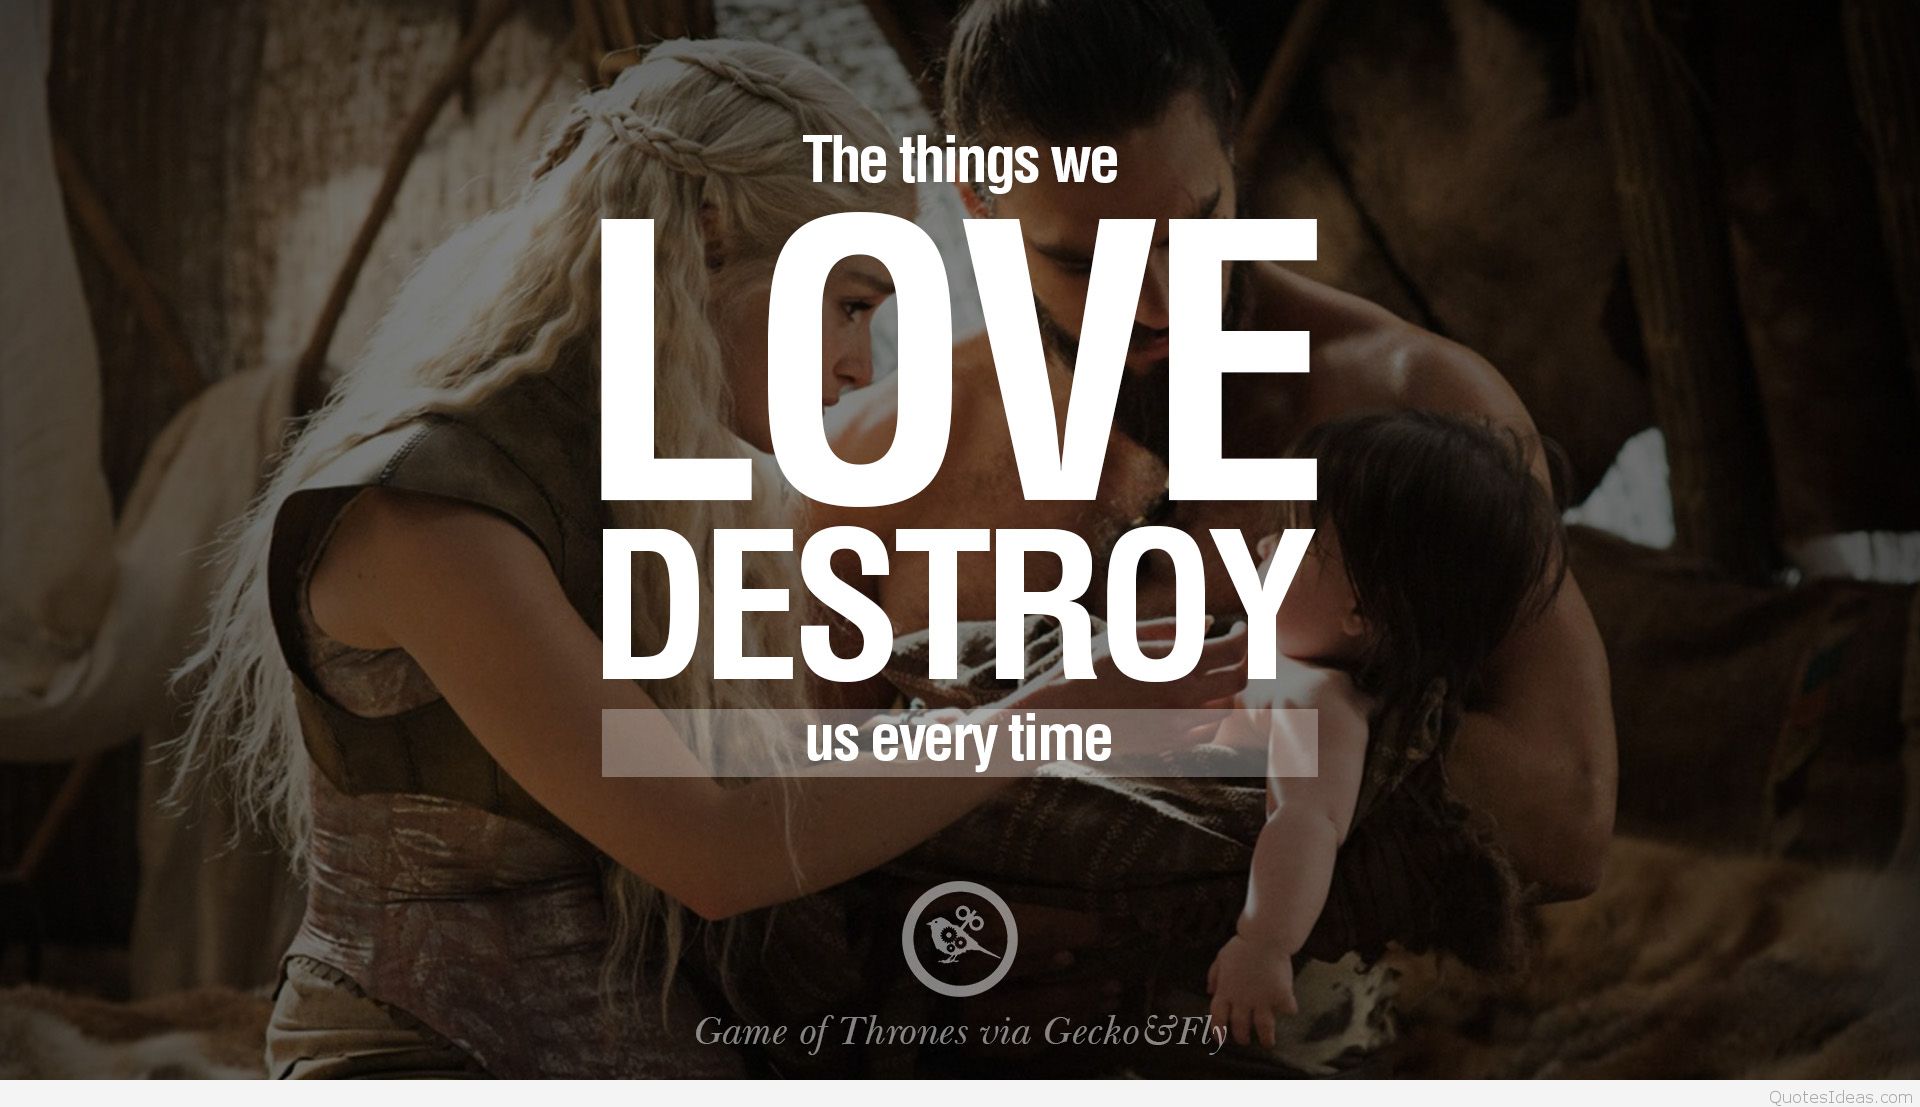 Game Of Thrones Quotes - Things We Love Destroy Us Every Time - HD Wallpaper 